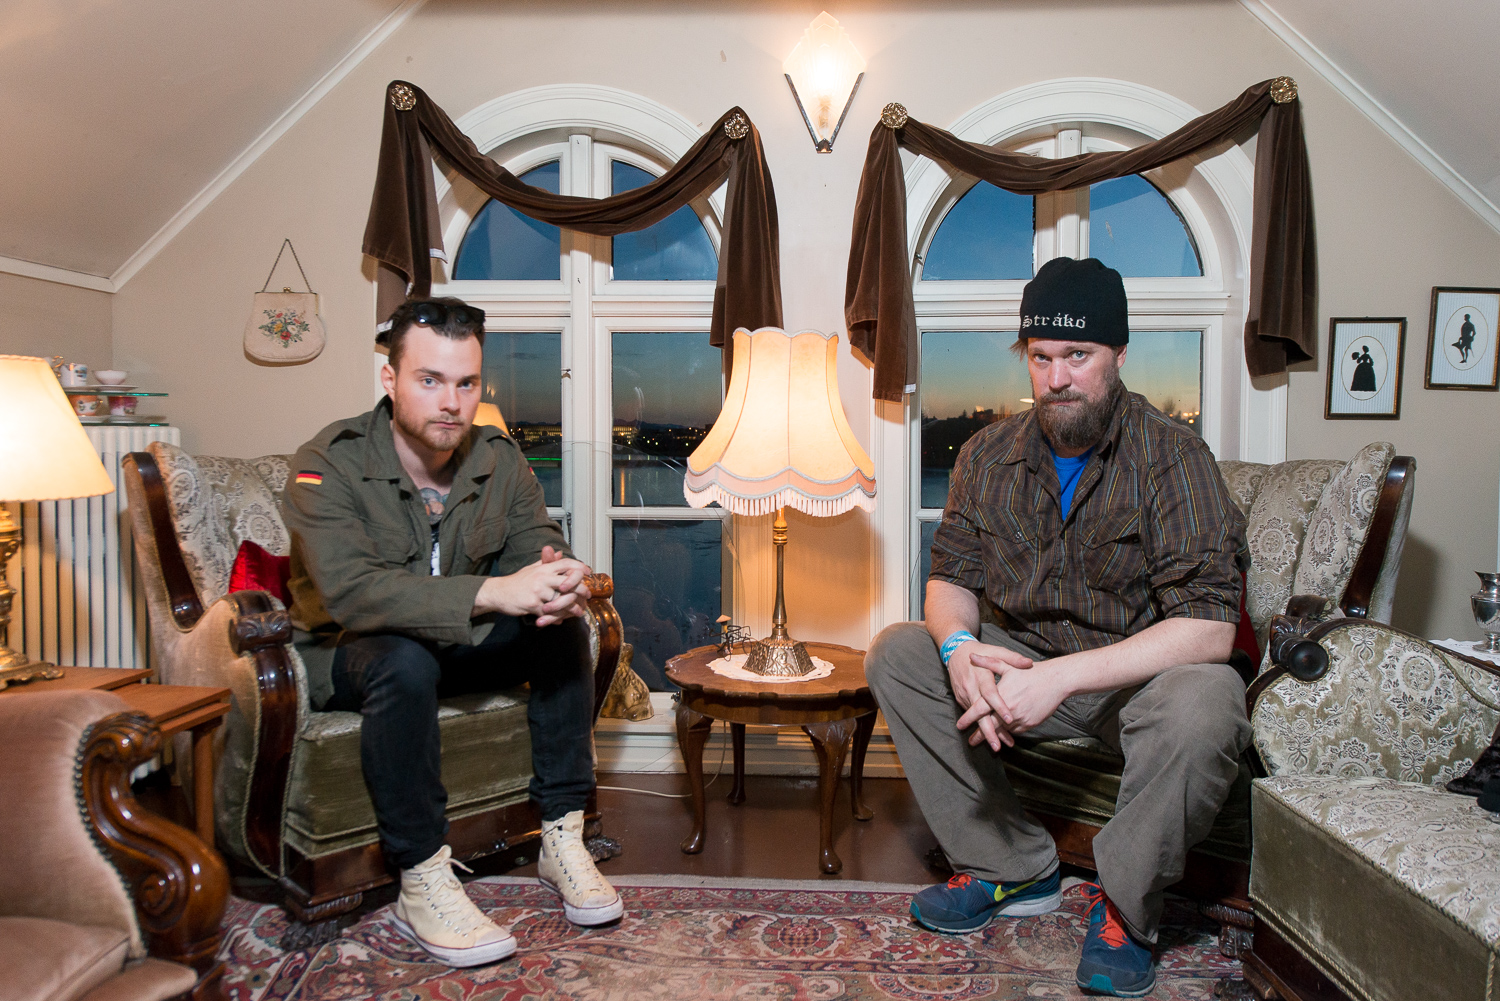 Speaking in Tongues: Ásgeir in conversation with John Grant